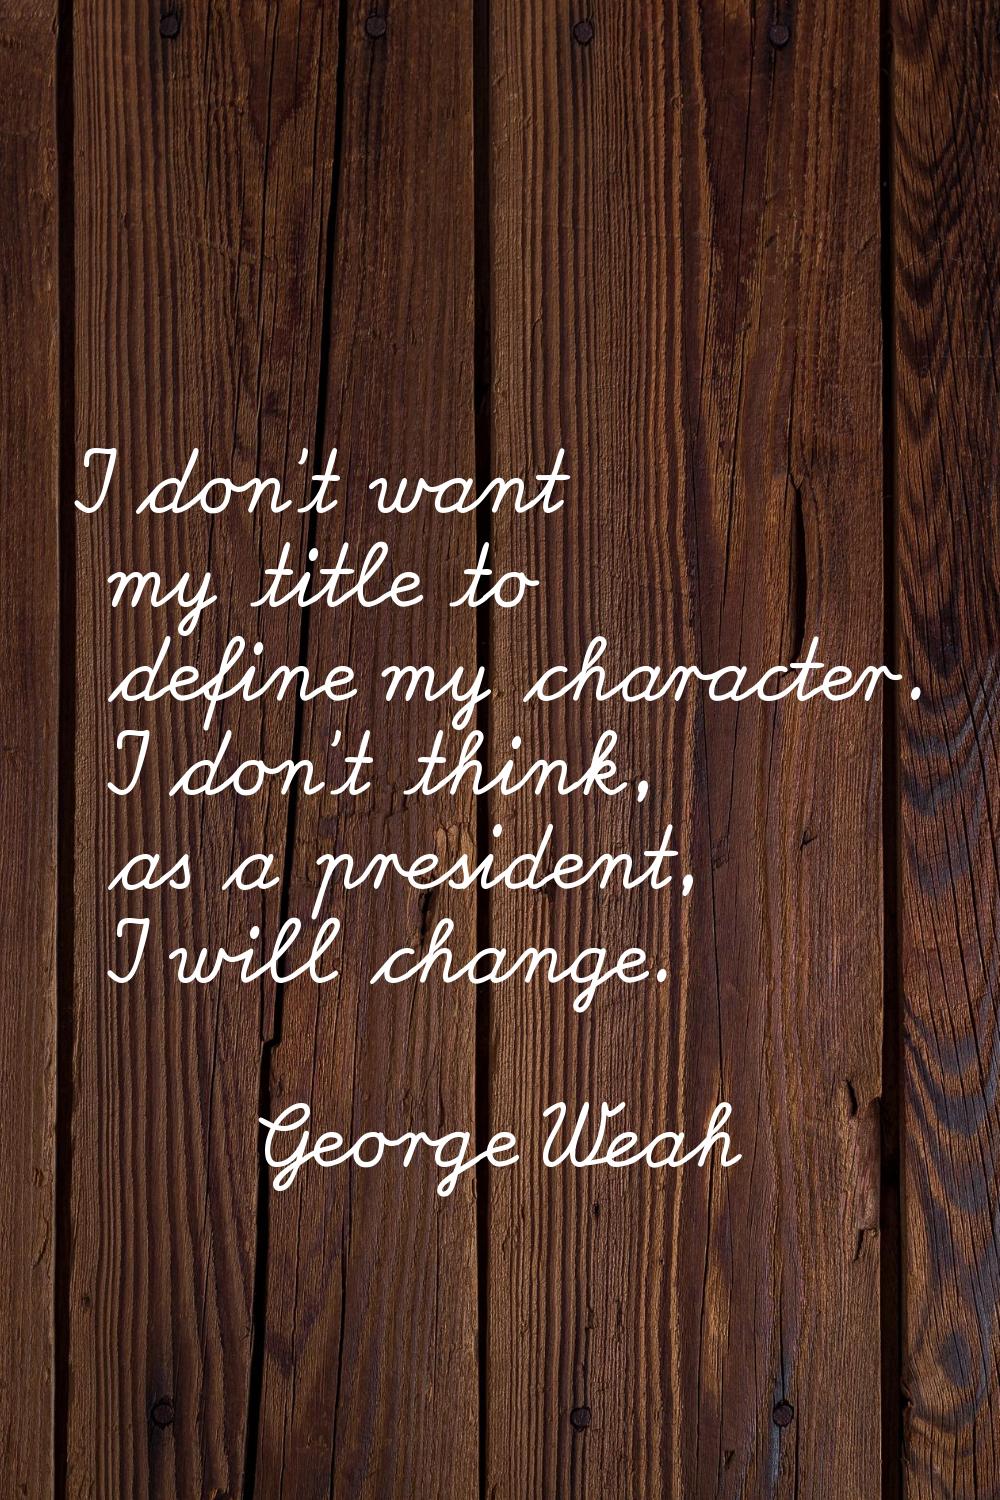 I don't want my title to define my character. I don't think, as a president, I will change.